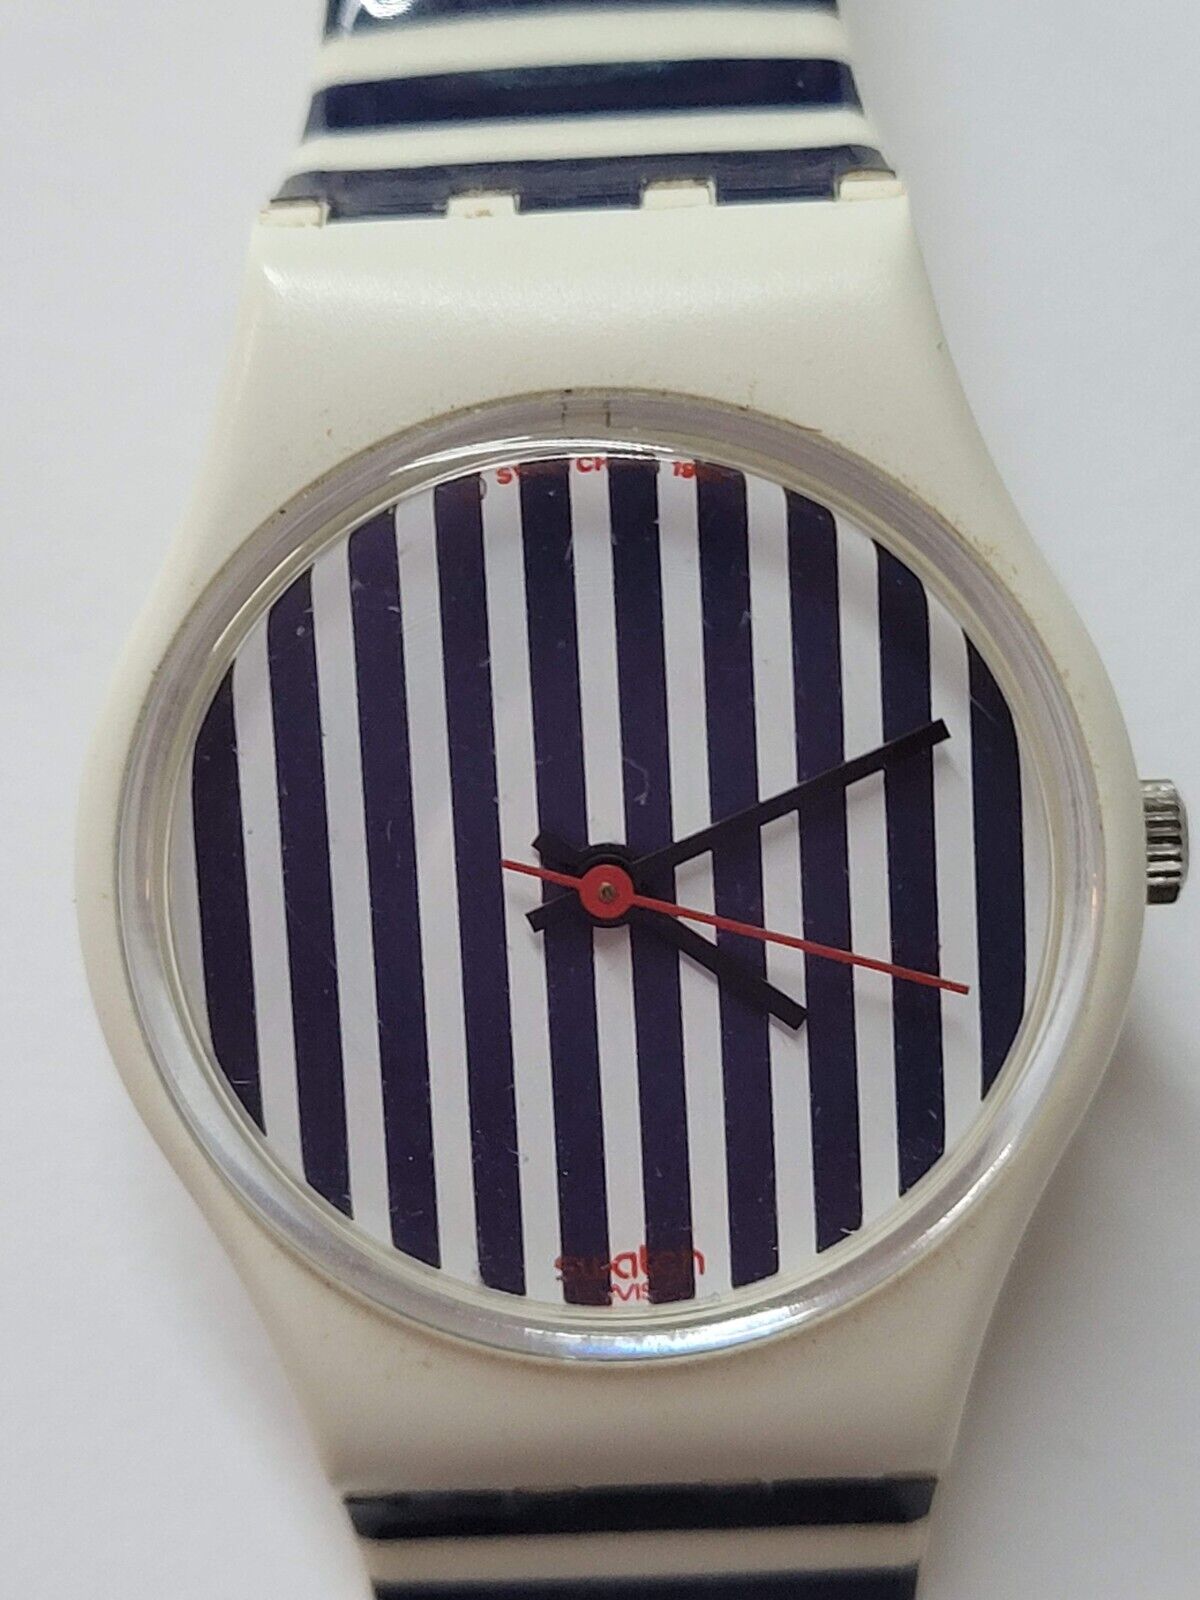 Swatch Watch 1988 Antibes LW120 Blue and White Stripes- Working/Great Condition